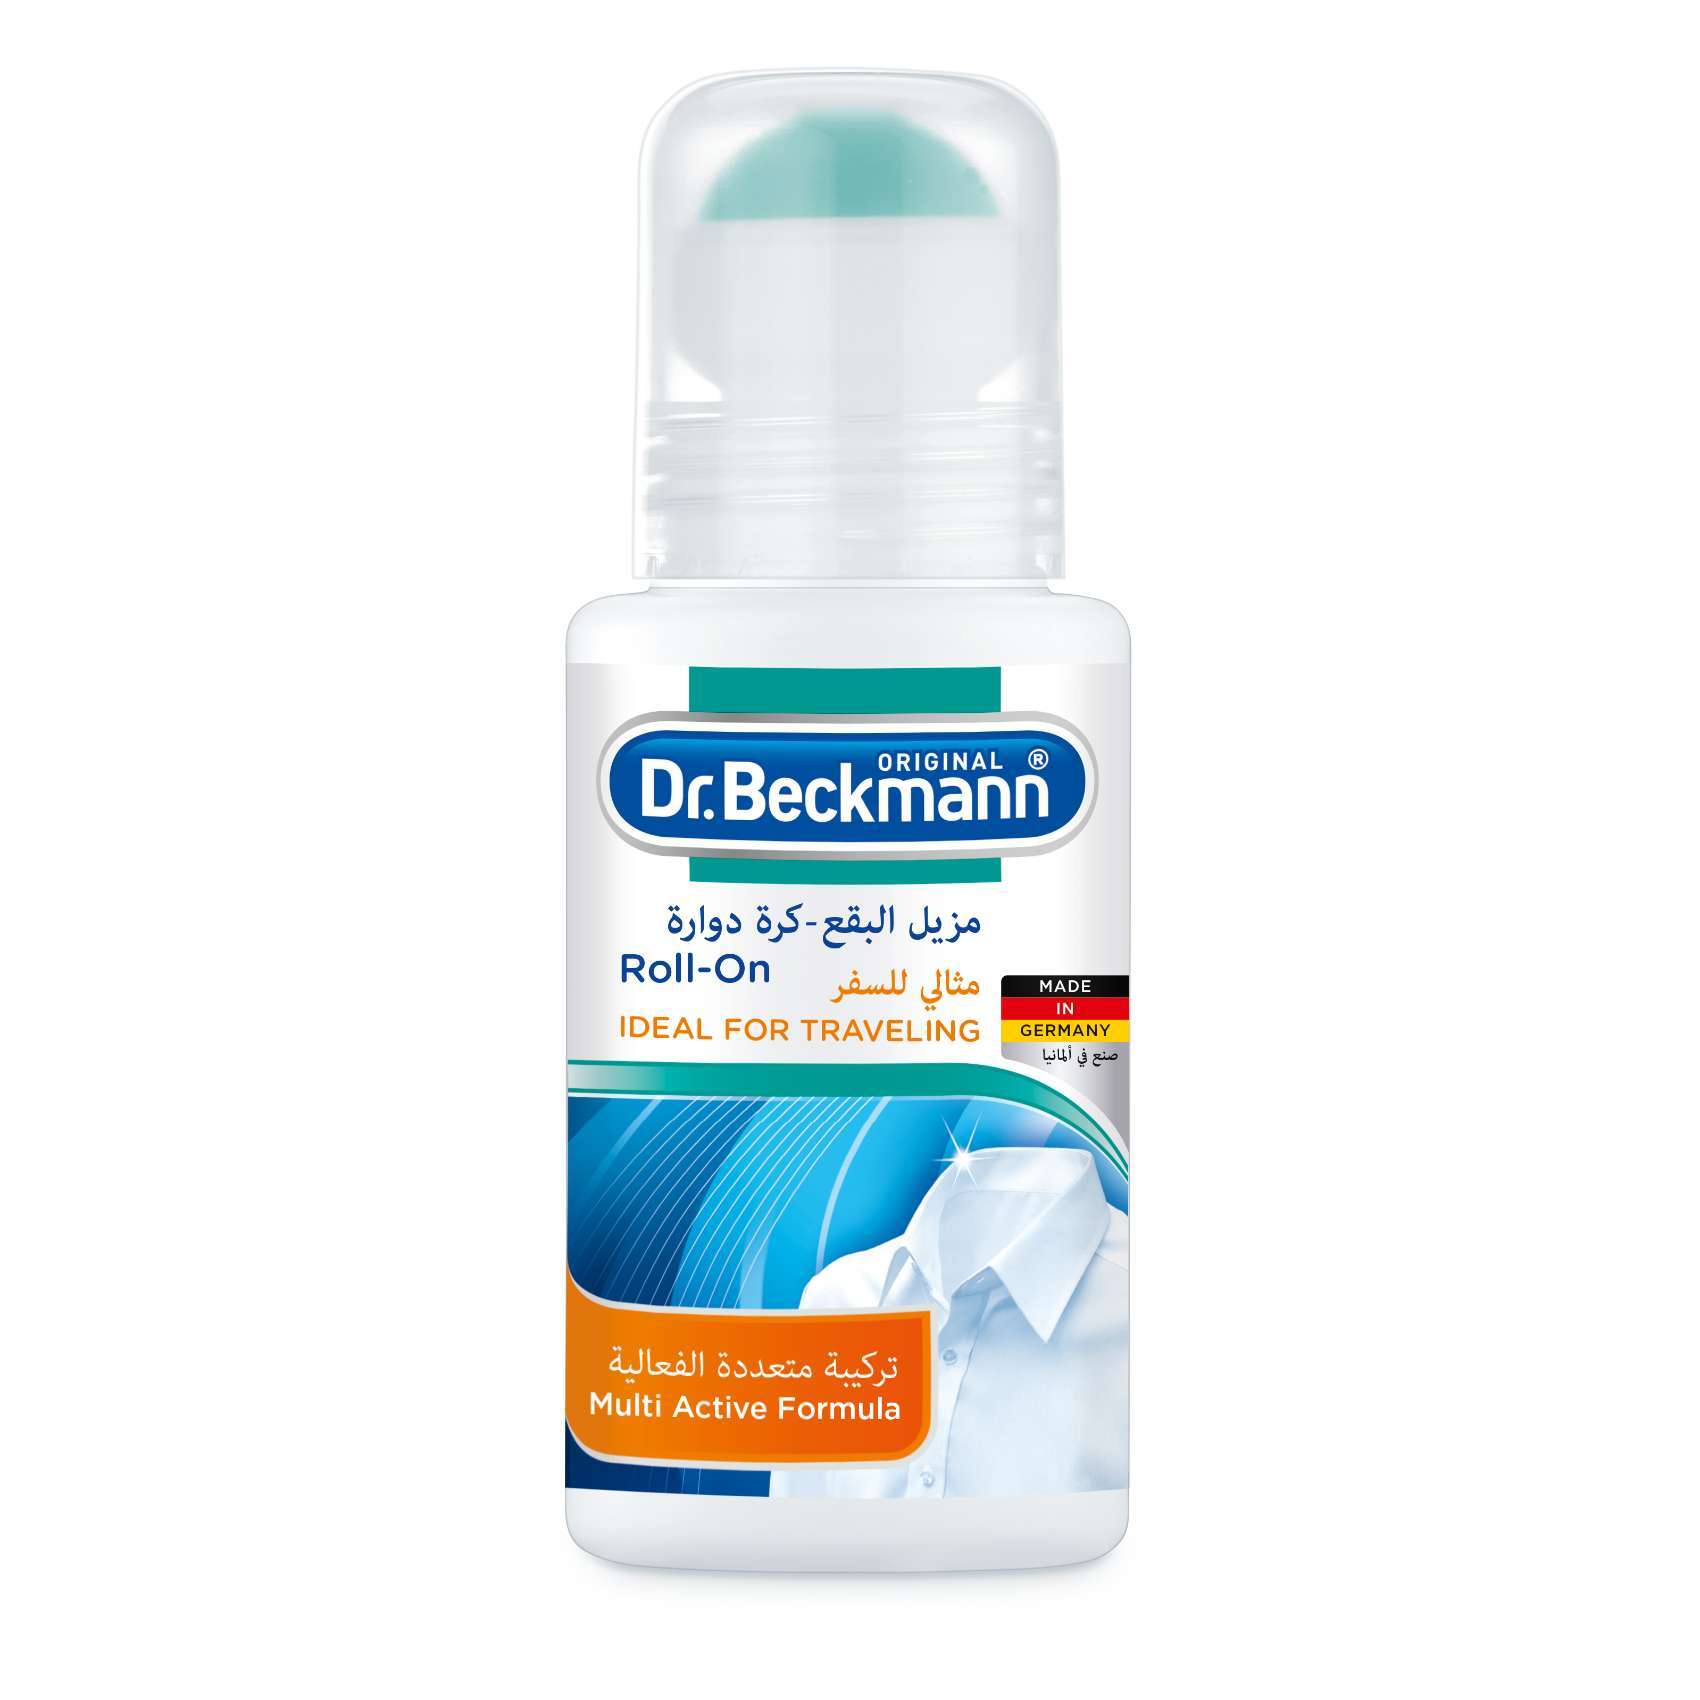 Dr. Beckmann Stain Remover Hygiene White 500g Buy Online at Best Price in  Gulf Countries 